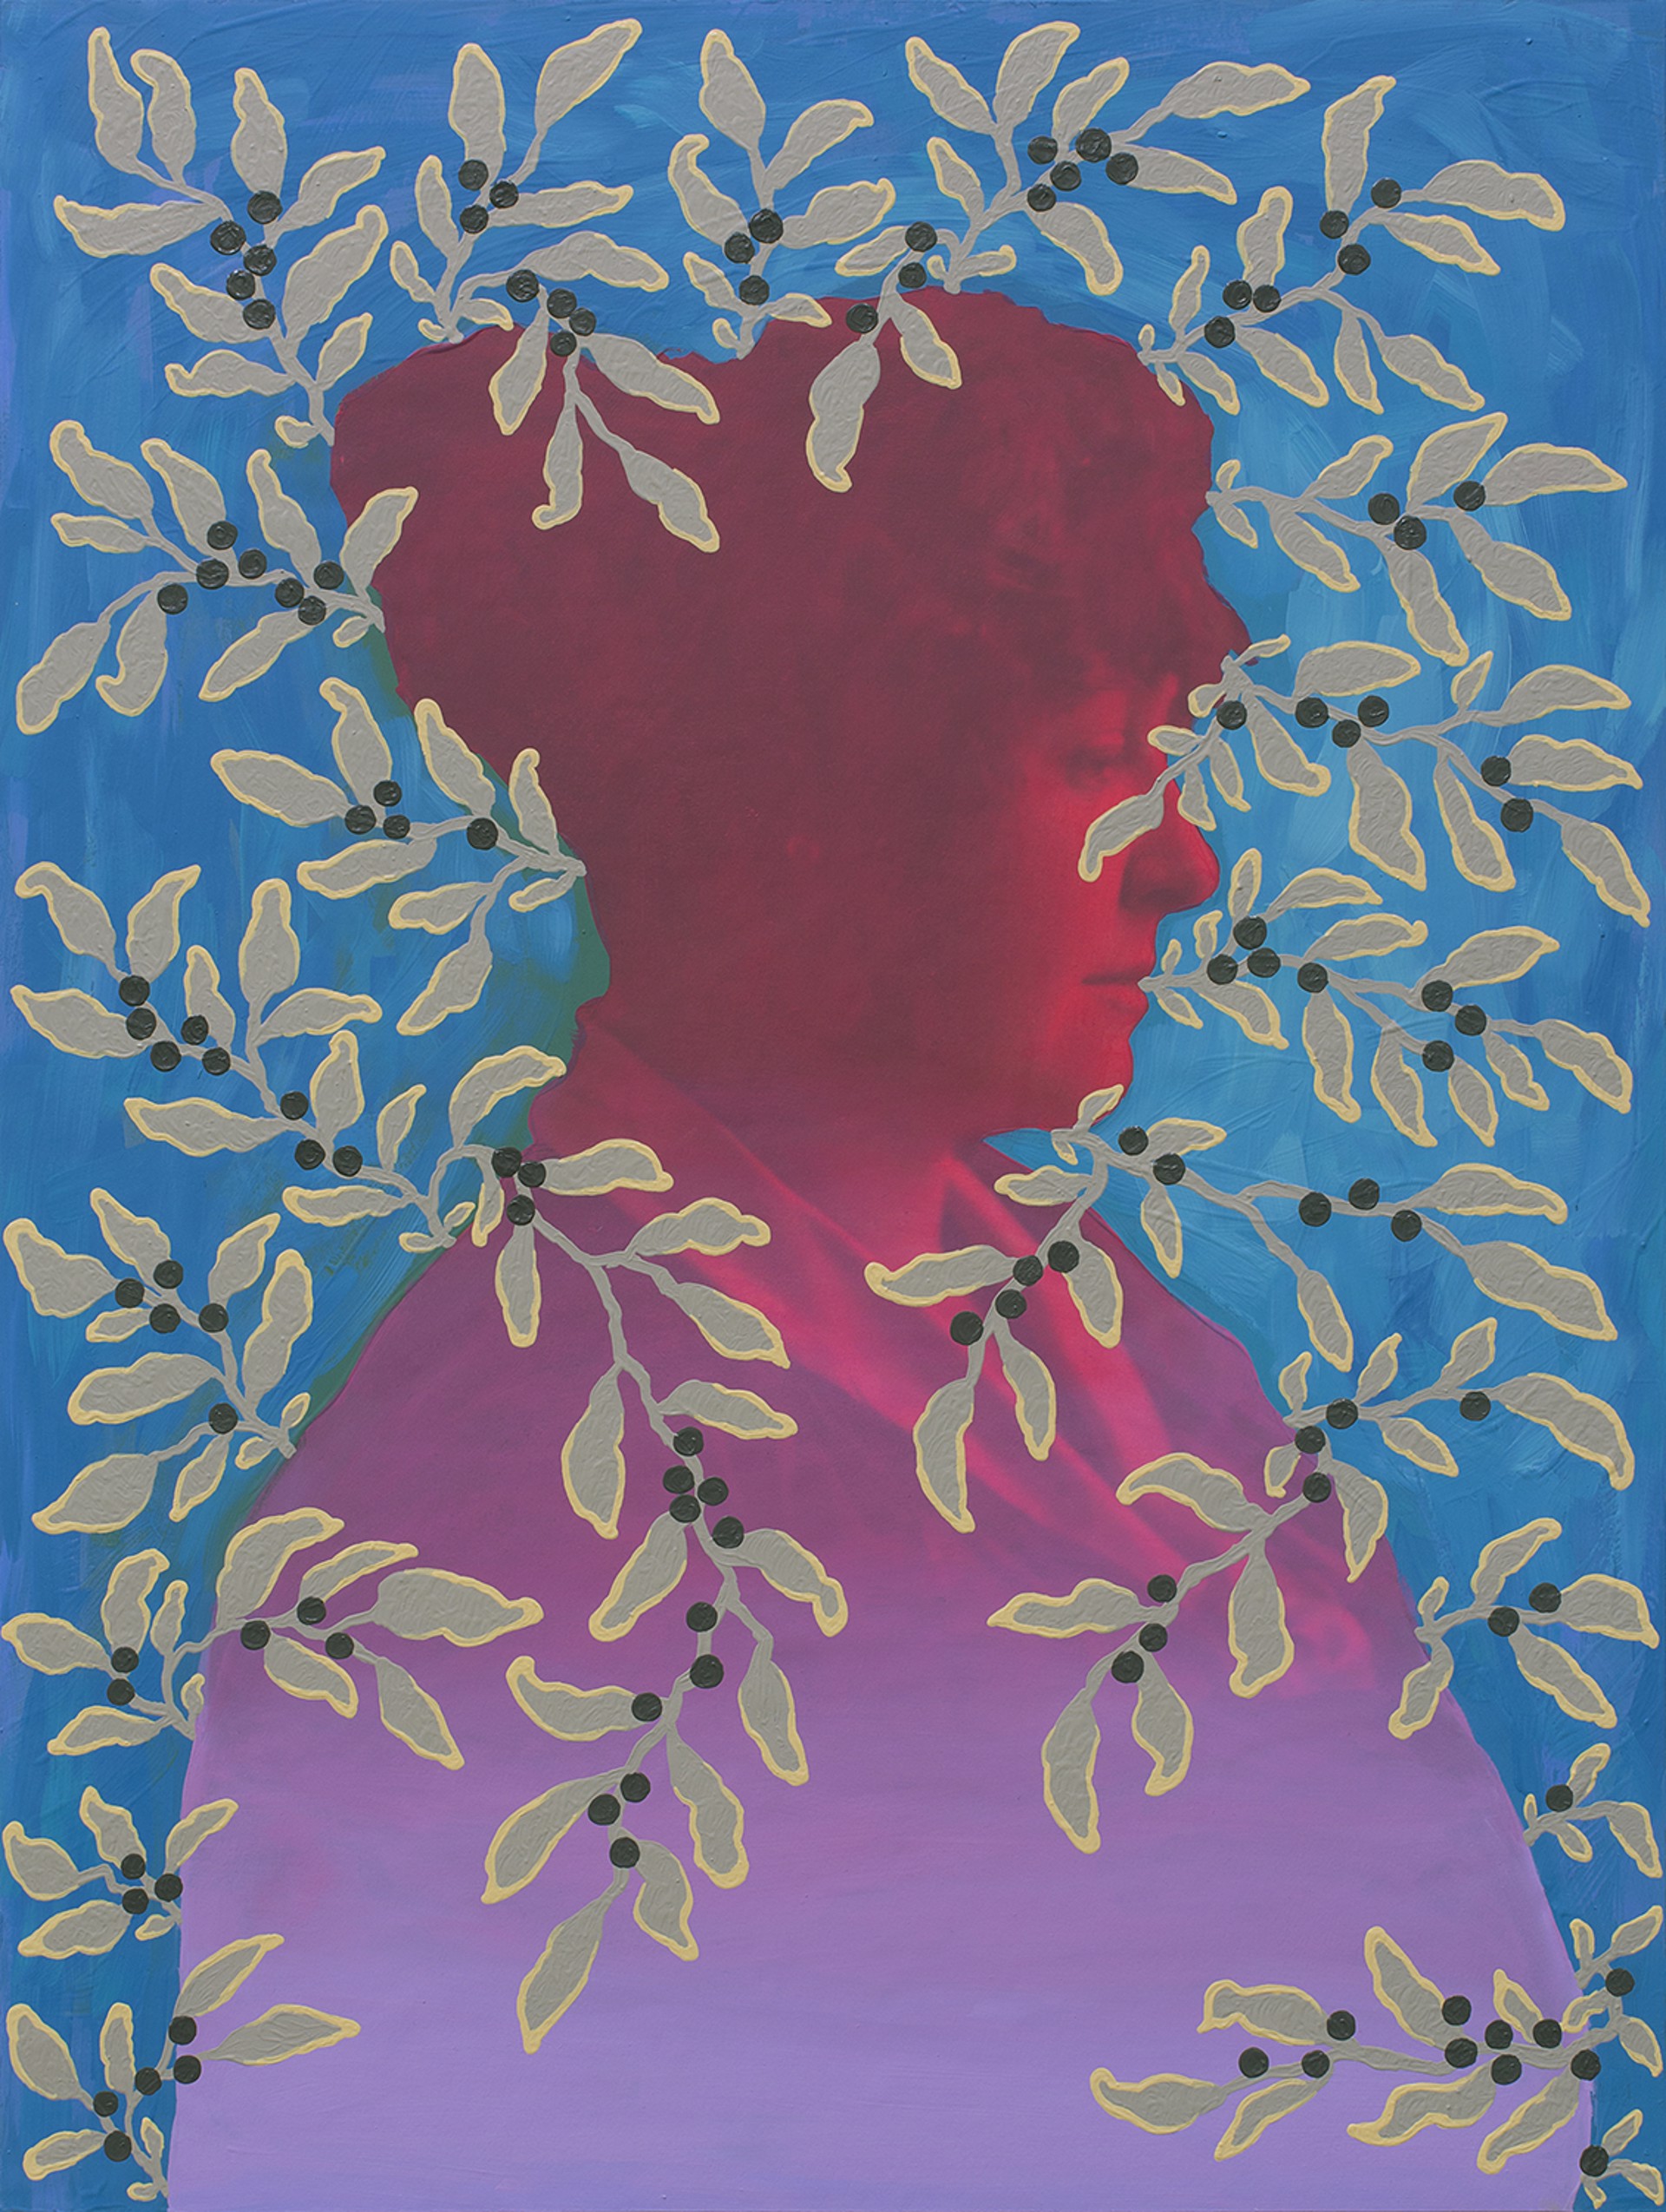 Untitled (Woman in Profile with Leaves and Berries) by Daisy Patton